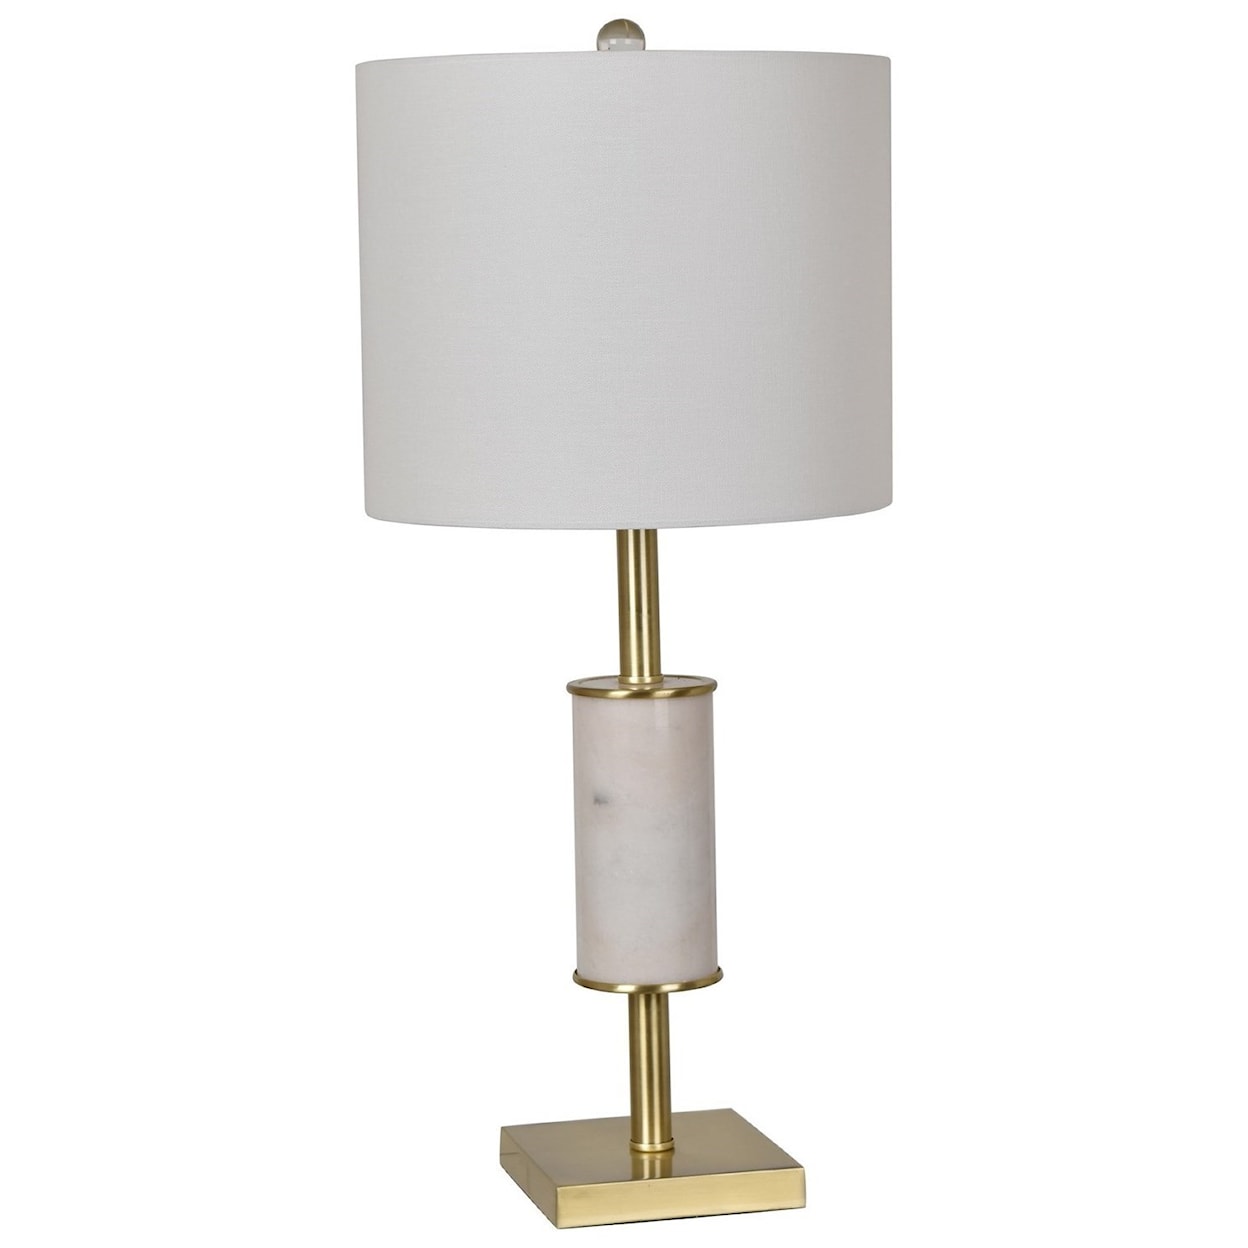 Crestview Collection Lighting Maxwell Table Lamp